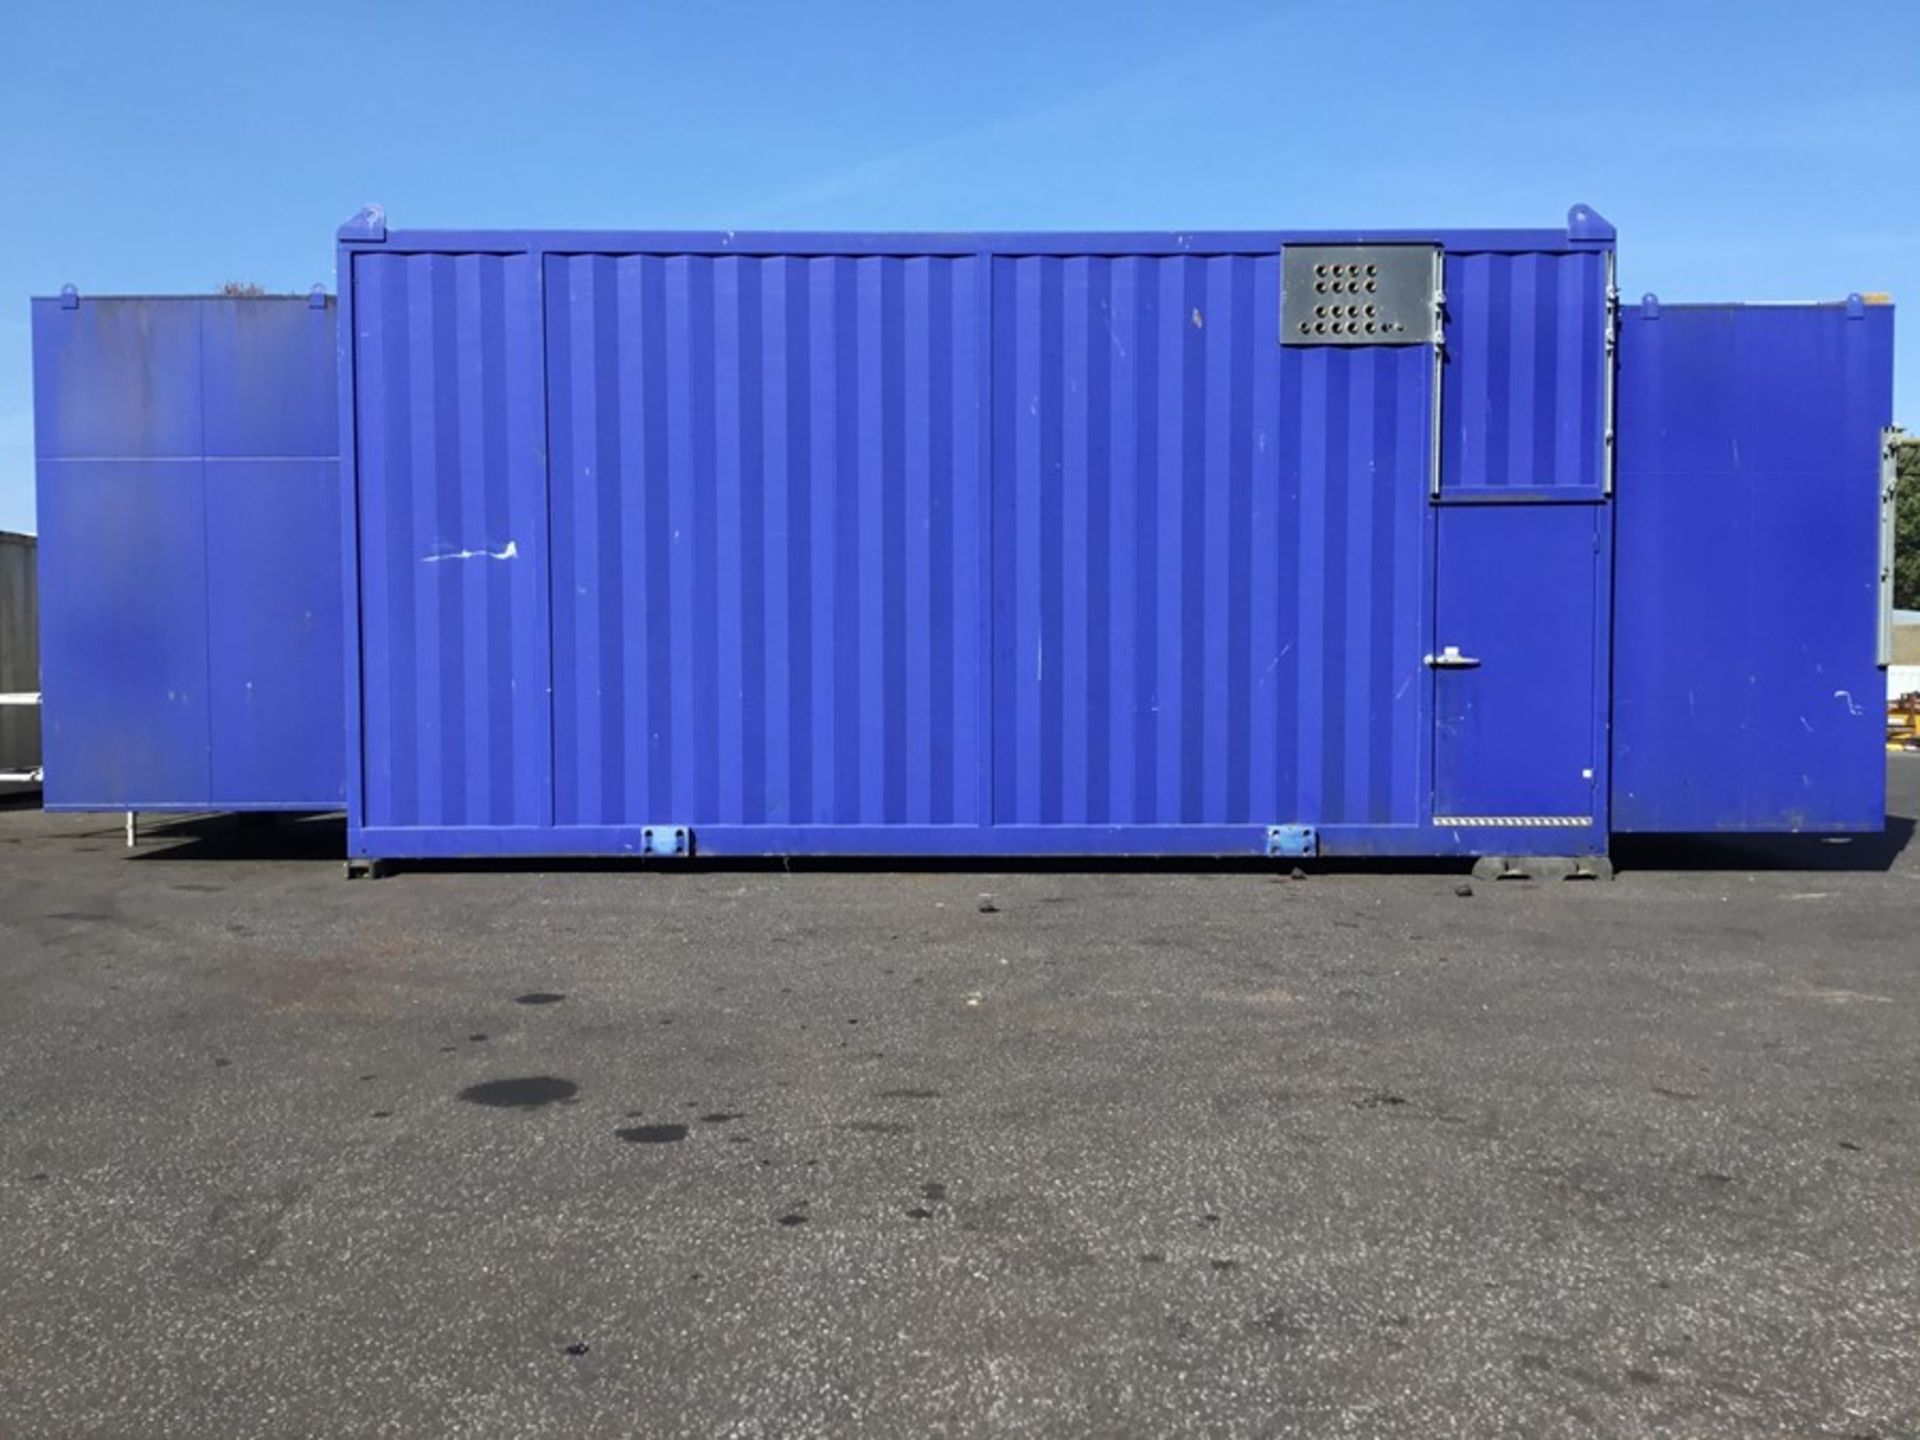 Ex Perkins 2000Kva Acoustic Generator house with two personnel doors 11.8 long x 4.2high x 3.7metres - Image 6 of 6